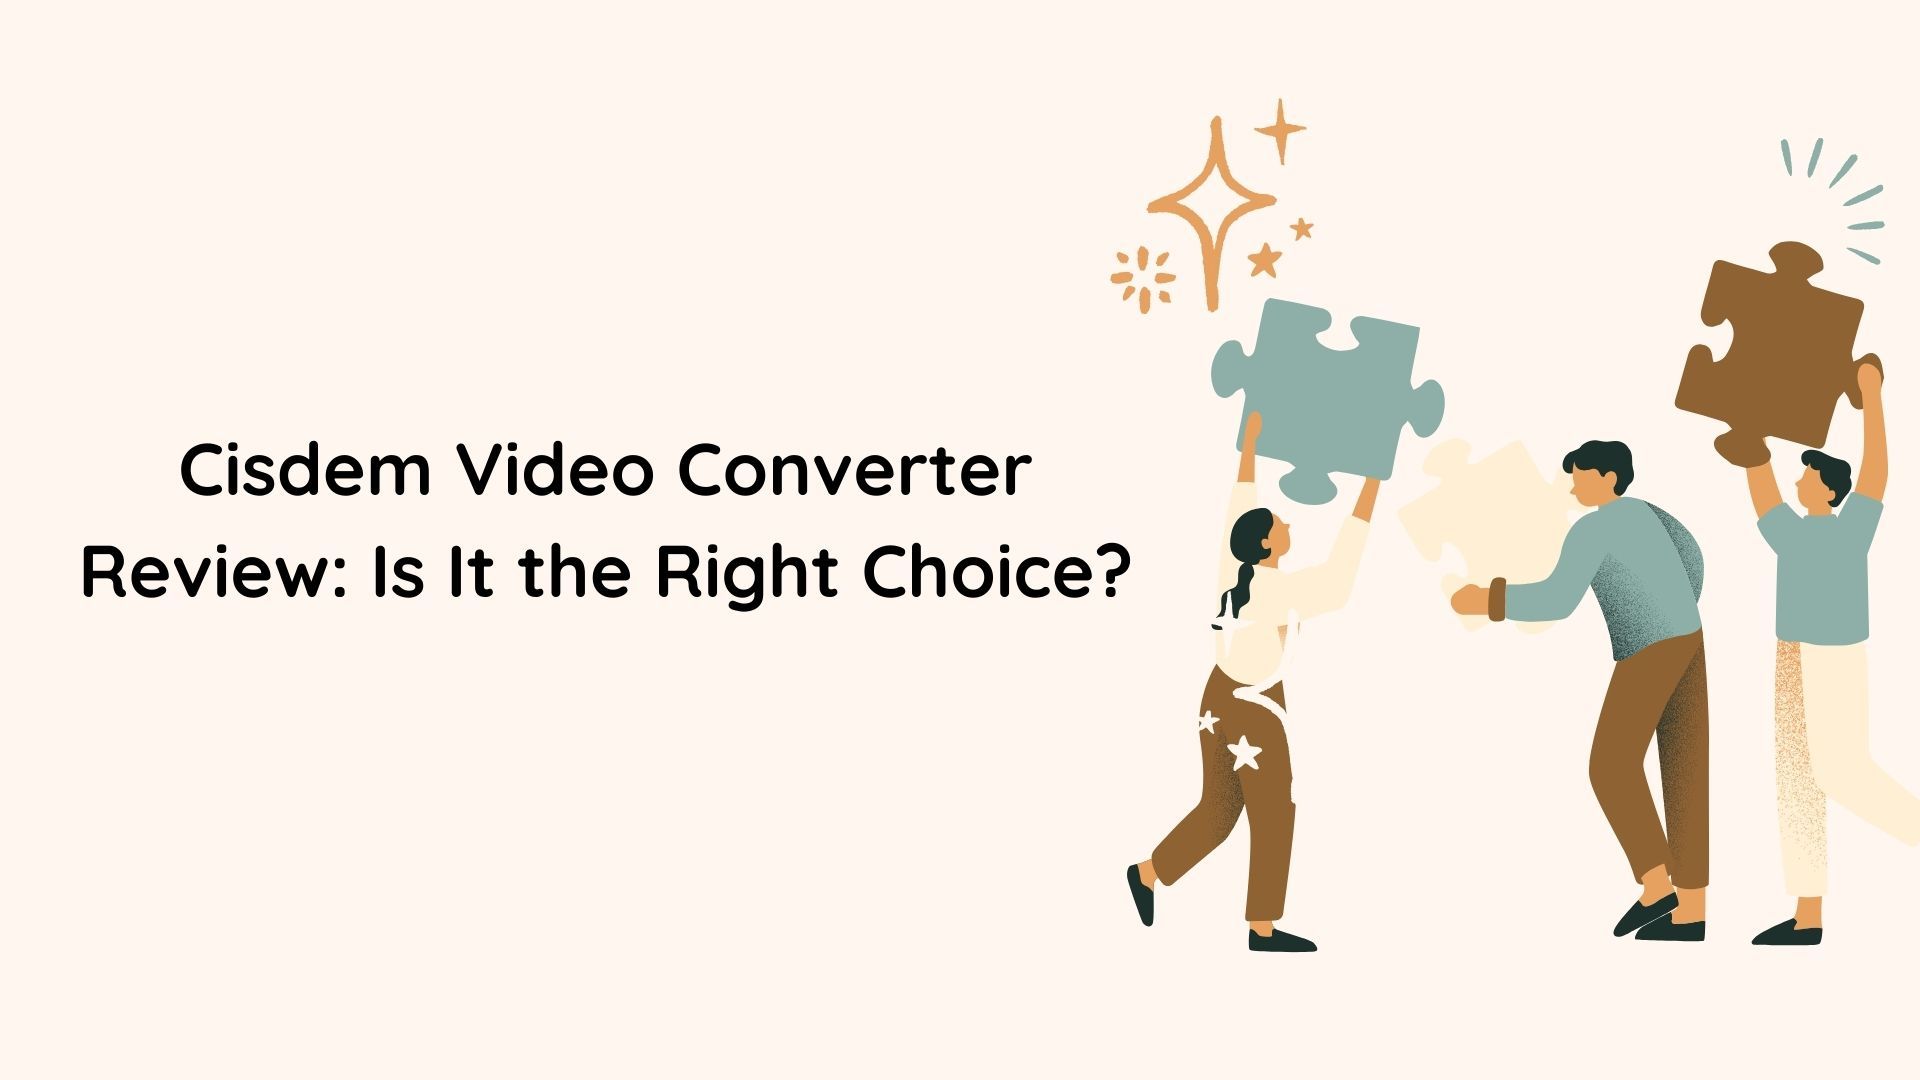 Cisdem Video Converter Review: Is It the Right Choice?